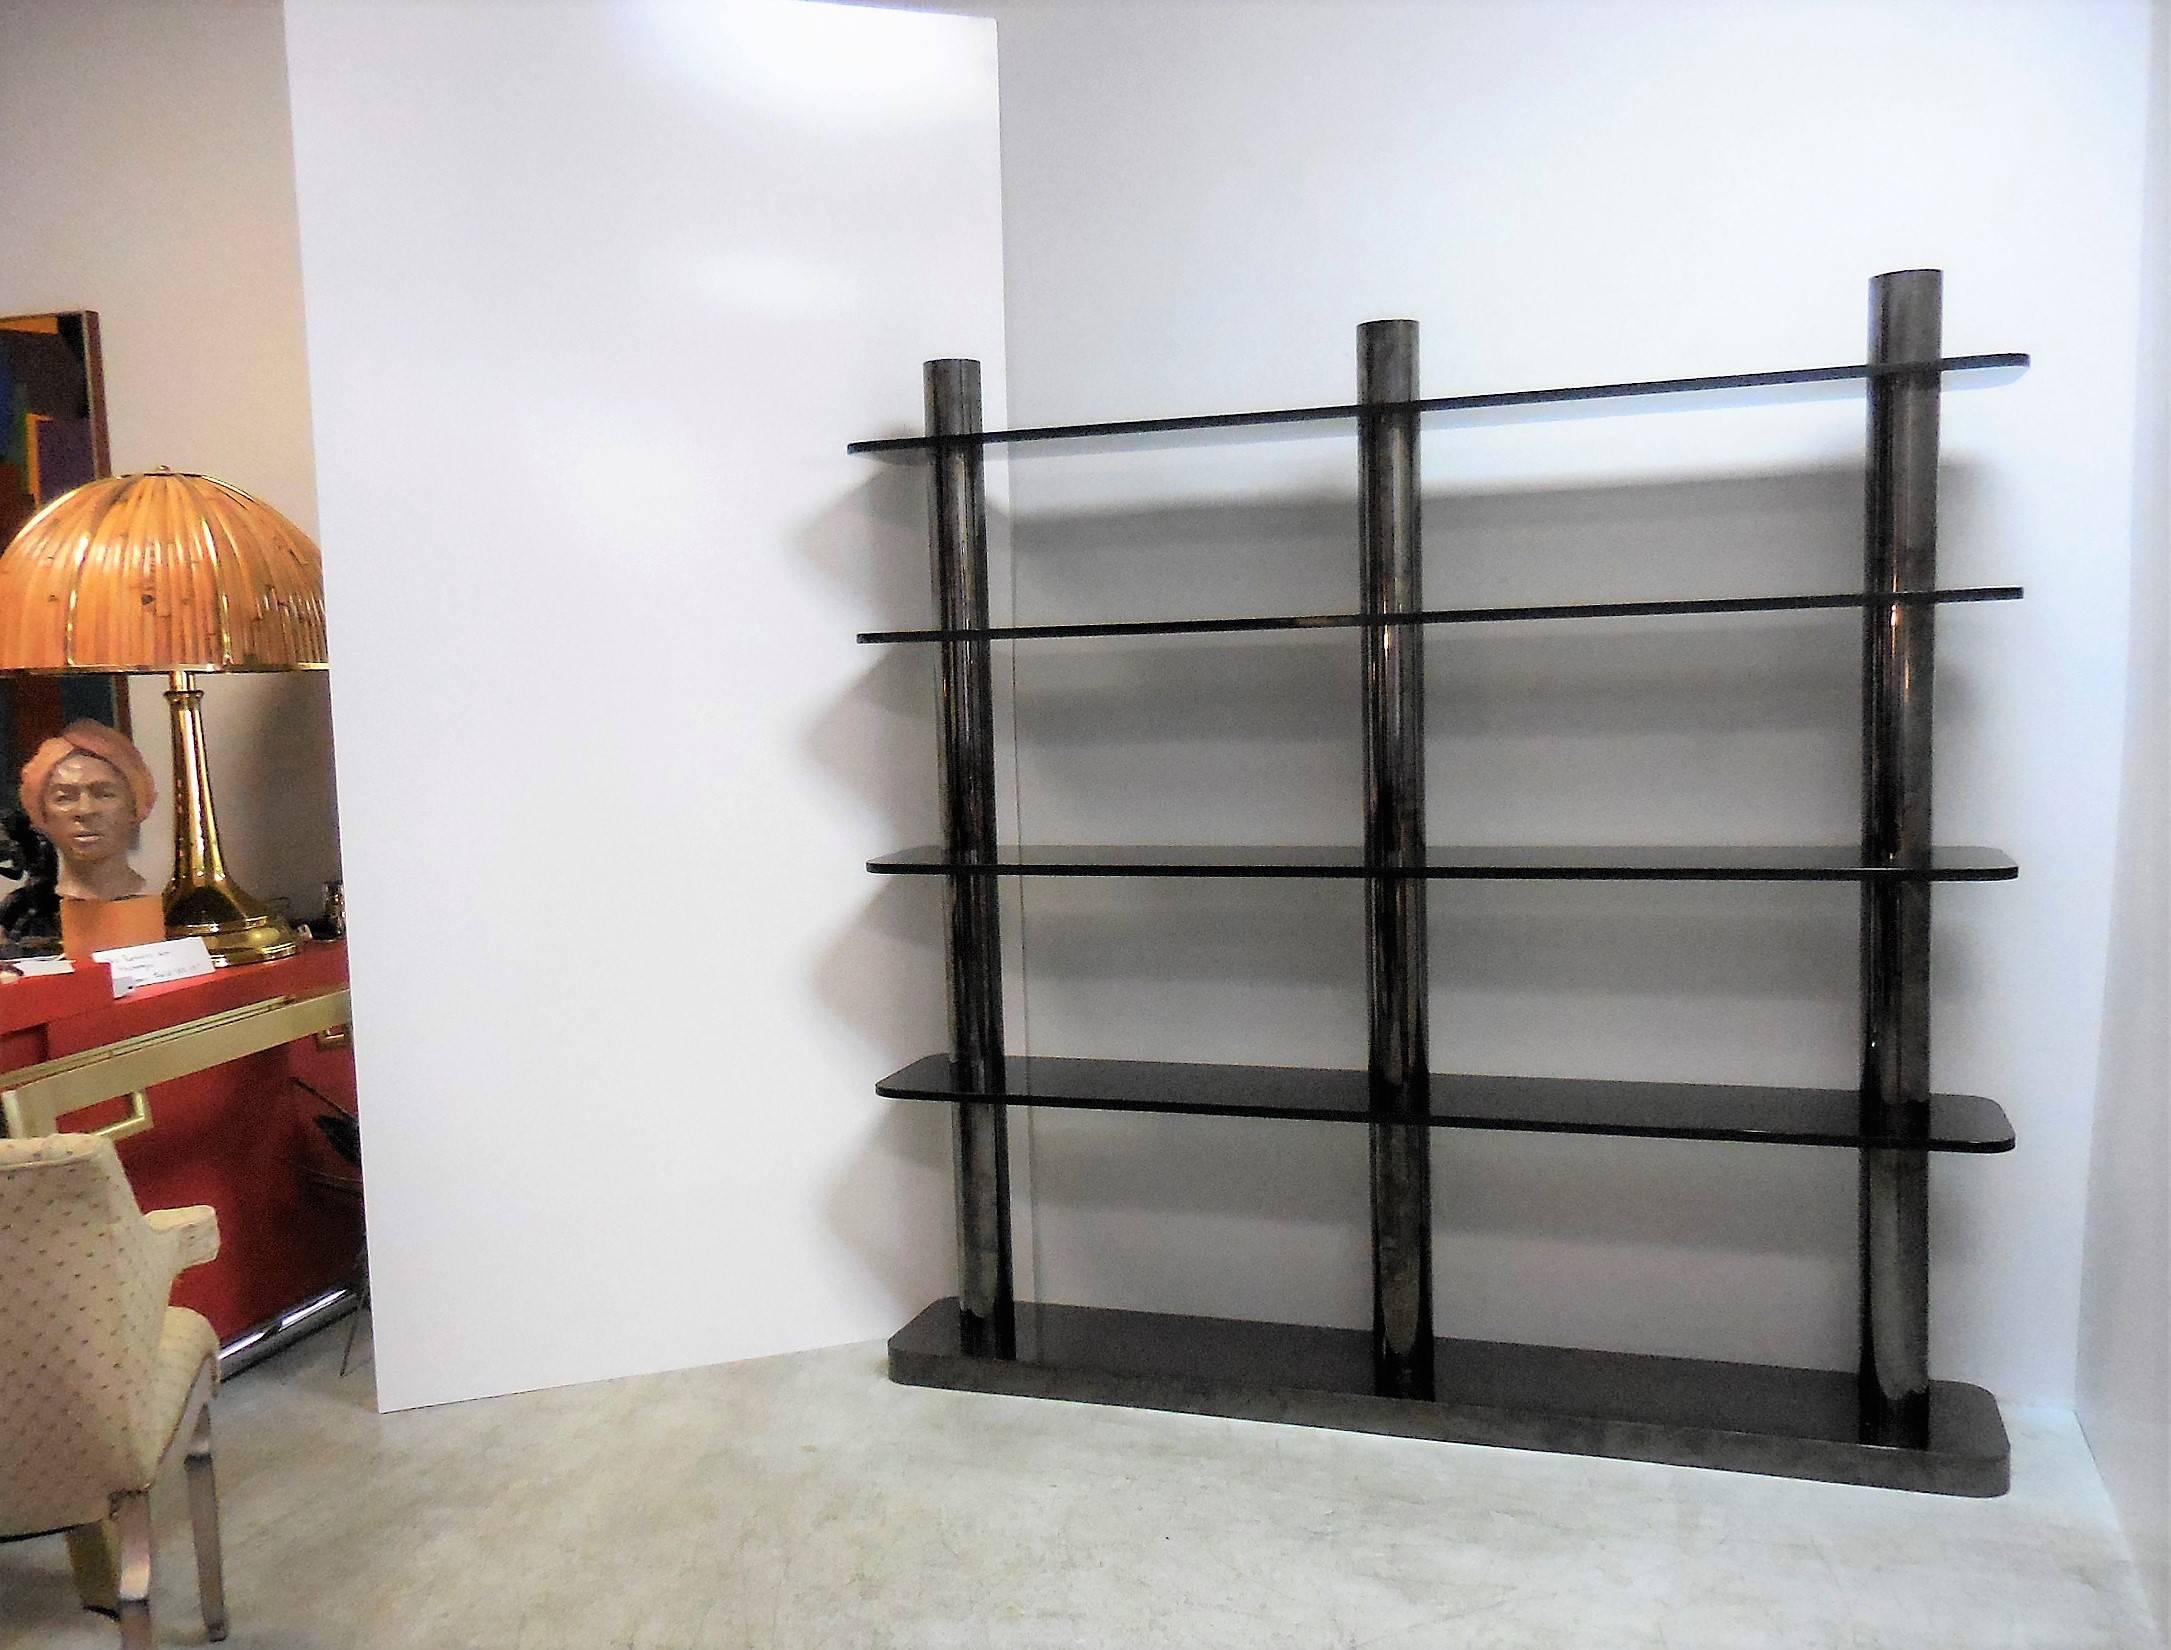 A rare Karl Springer freestanding bookcase or etagere. Bronze columns with gun metal finish and smoked glass shelves. The design is miraculously simple and yet sexy, bold and functional. Certificate of authenticity included.